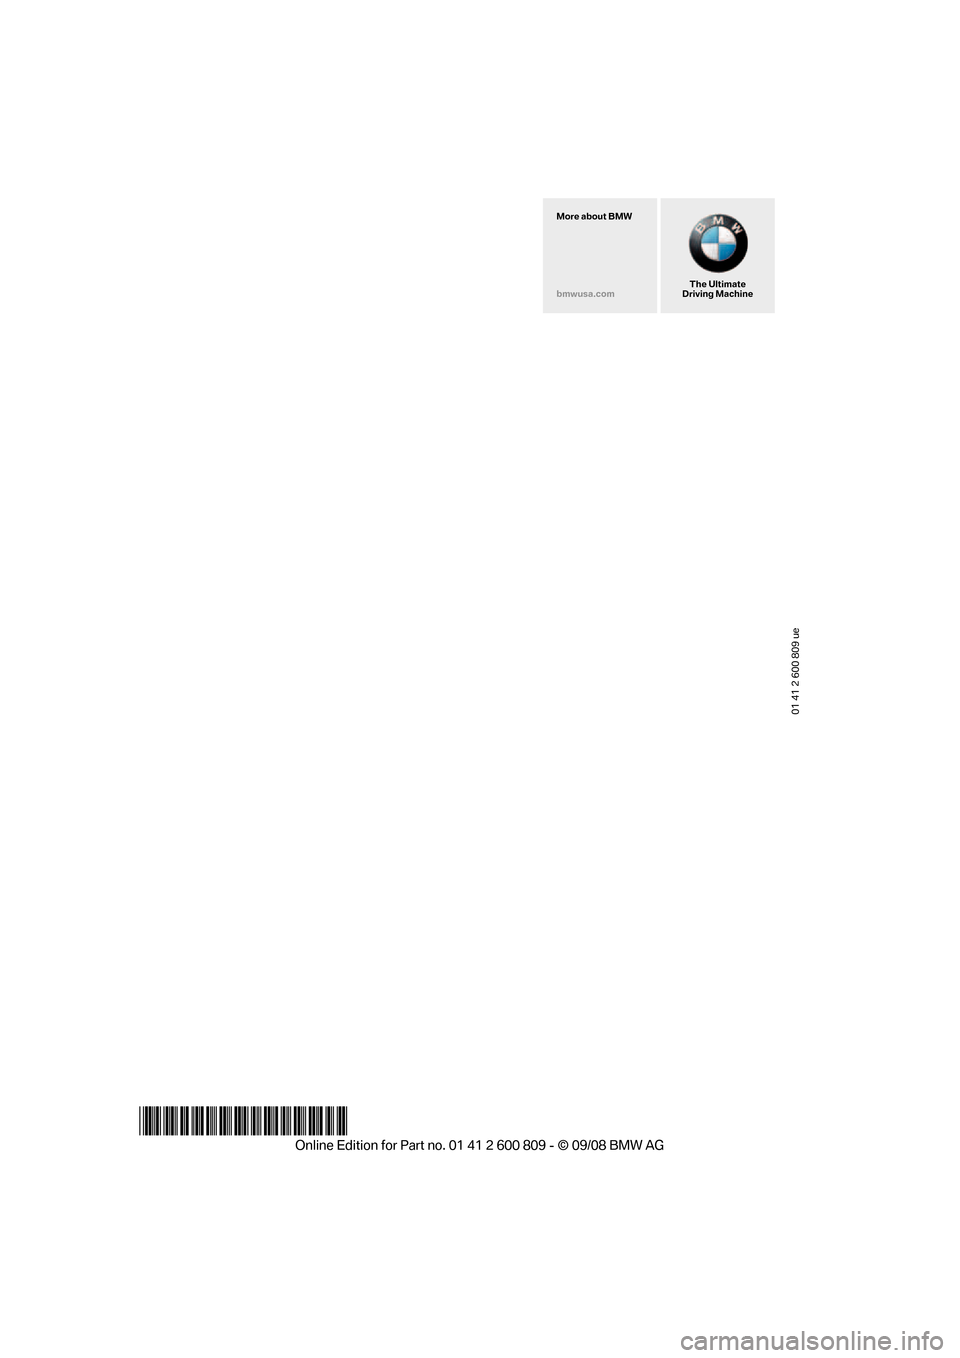 BMW X6 XDRIVE 2009 E71 Owners Manual 01 41 2 600 809 ue
*BL2600809009*
The Ultimate
Driving Machine
More about BMW
bmwusa.com 